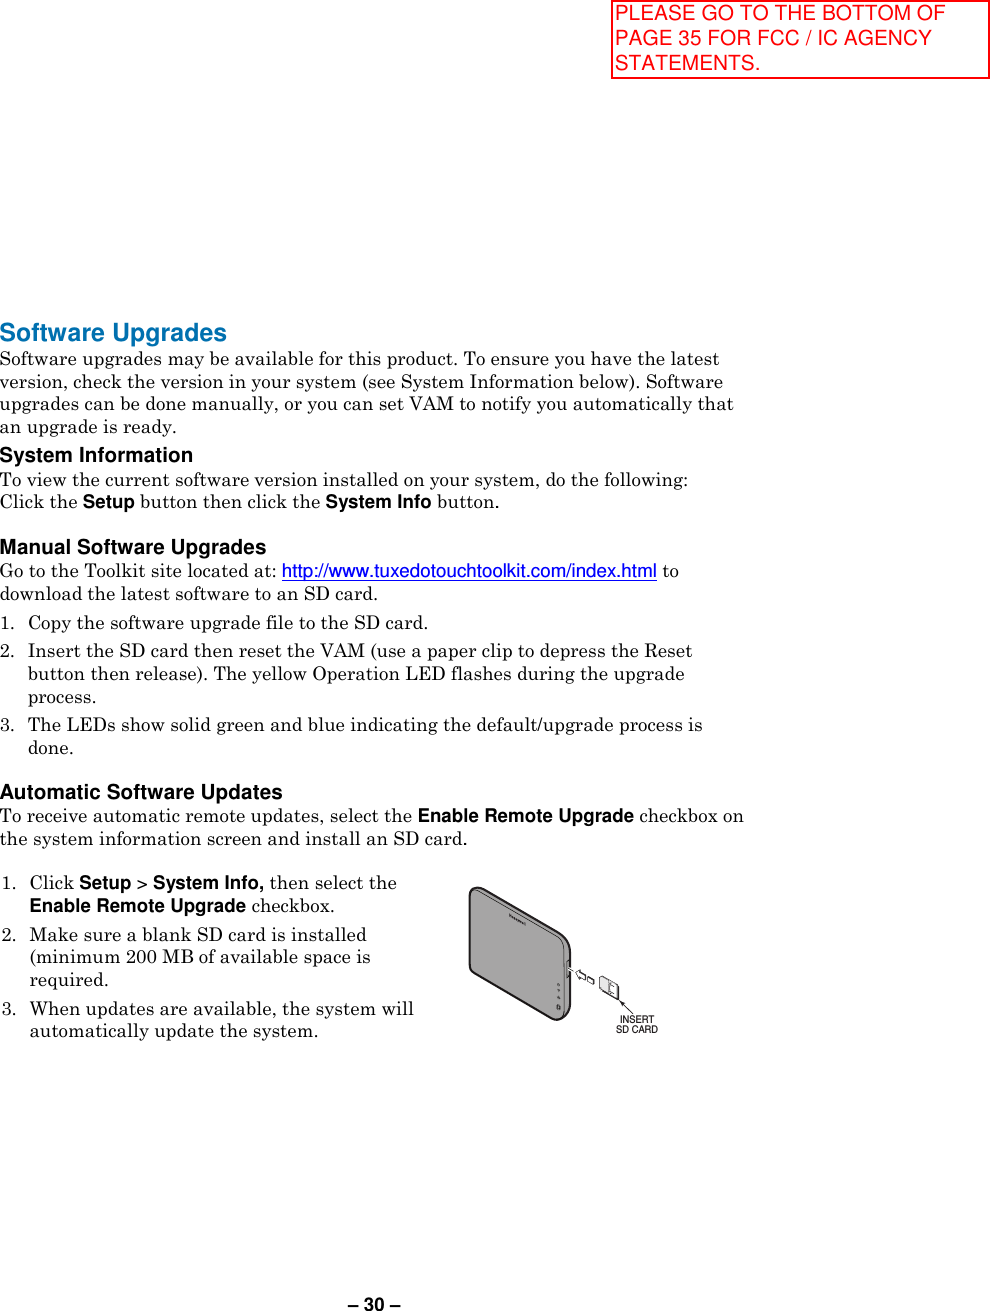 – 30 – Software Upgrades Software upgrades may be available for this product. To ensure you have the latest version, check the version in your system (see System Information below). Software upgrades can be done manually, or you can set VAM to notify you automatically that an upgrade is ready. System Information  To view the current software version installed on your system, do the following: Click the Setup button then click the System Info button.  Manual Software Upgrades Go to the Toolkit site located at: http://www.tuxedotouchtoolkit.com/index.html to download the latest software to an SD card. 1. Copy the software upgrade file to the SD card. 2. Insert the SD card then reset the VAM (use a paper clip to depress the Reset button then release). The yellow Operation LED flashes during the upgrade process. 3. The LEDs show solid green and blue indicating the default/upgrade process is done.  Automatic Software Updates To receive automatic remote updates, select the Enable Remote Upgrade checkbox on the system information screen and install an SD card.  1. Click Setup &gt; System Info, then select the Enable Remote Upgrade checkbox. 2.  Make sure a blank SD card is installed (minimum 200 MB of available space is required. 3.  When updates are available, the system will automatically update the system.   INSERTSD CARD  PLEASE GO TO THE BOTTOM OF PAGE 35 FOR FCC / IC AGENCY STATEMENTS.